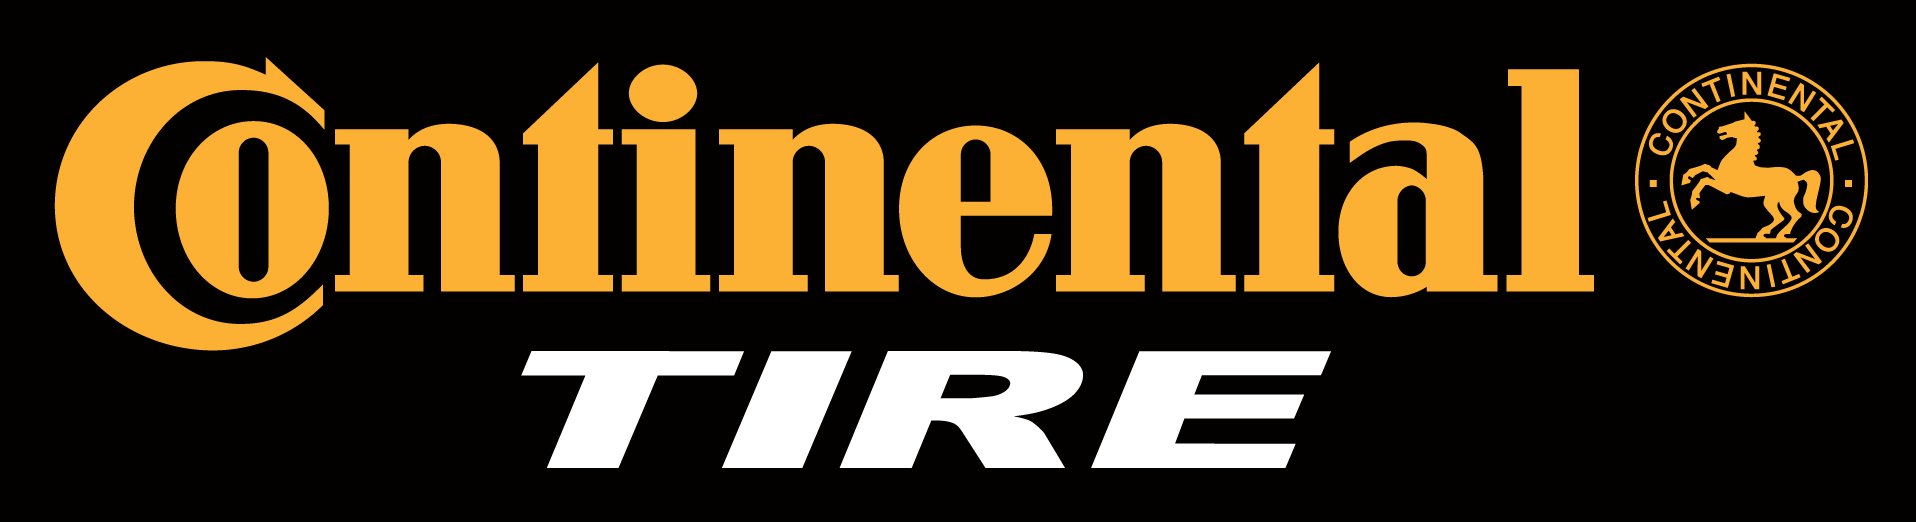 Continental Tire - Continental Tires Vector, Transparent background PNG HD thumbnail